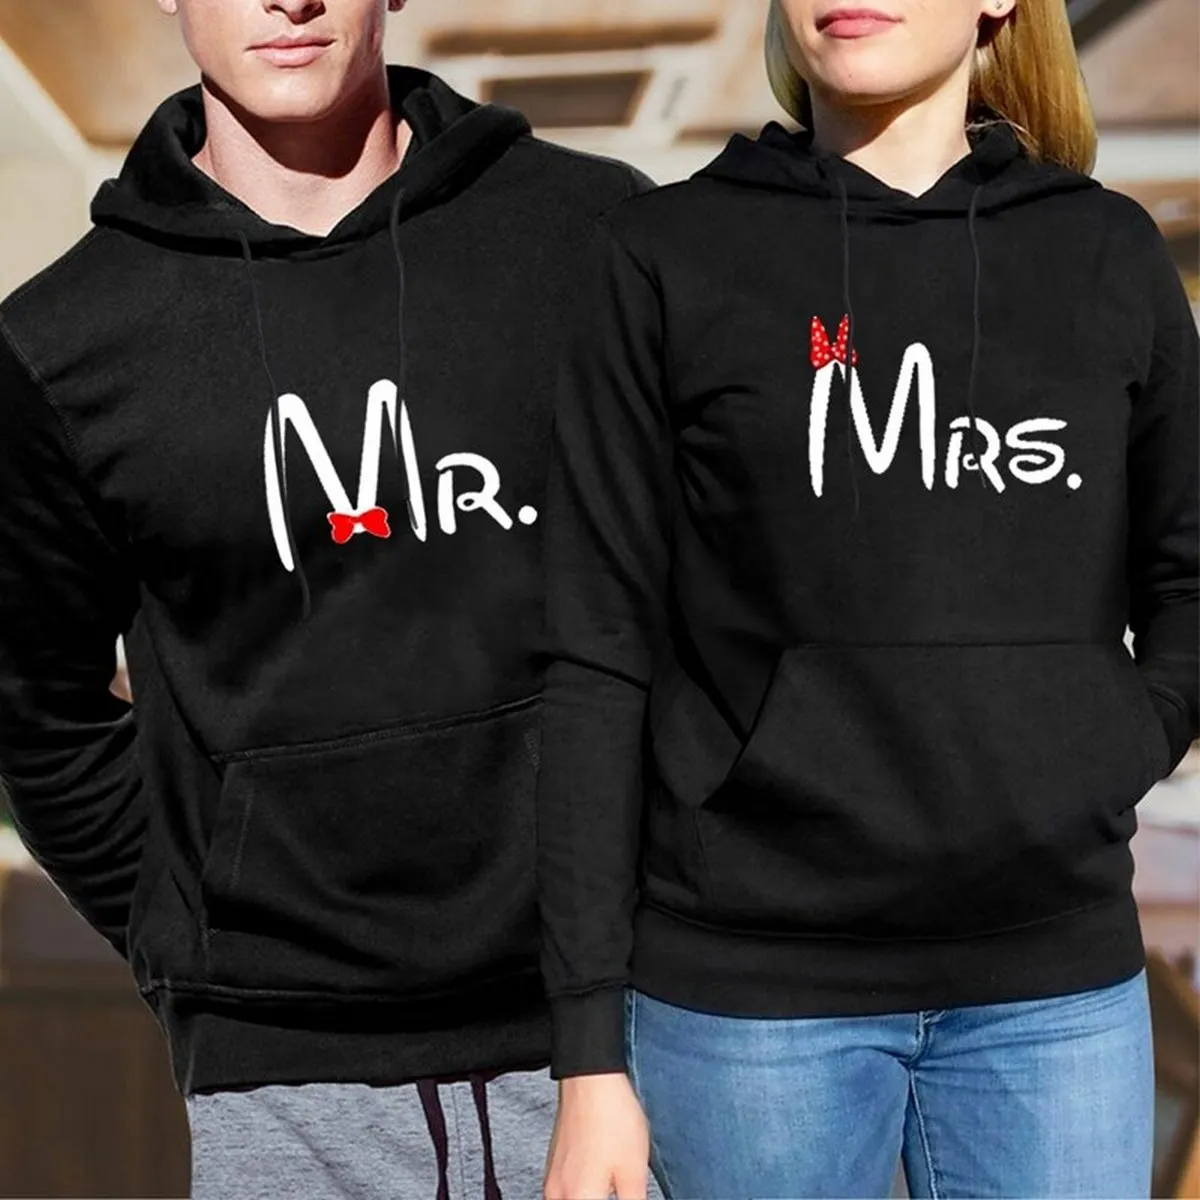 Couples Lovely MR. MRS. Couple matching Hoodies Pack of 2